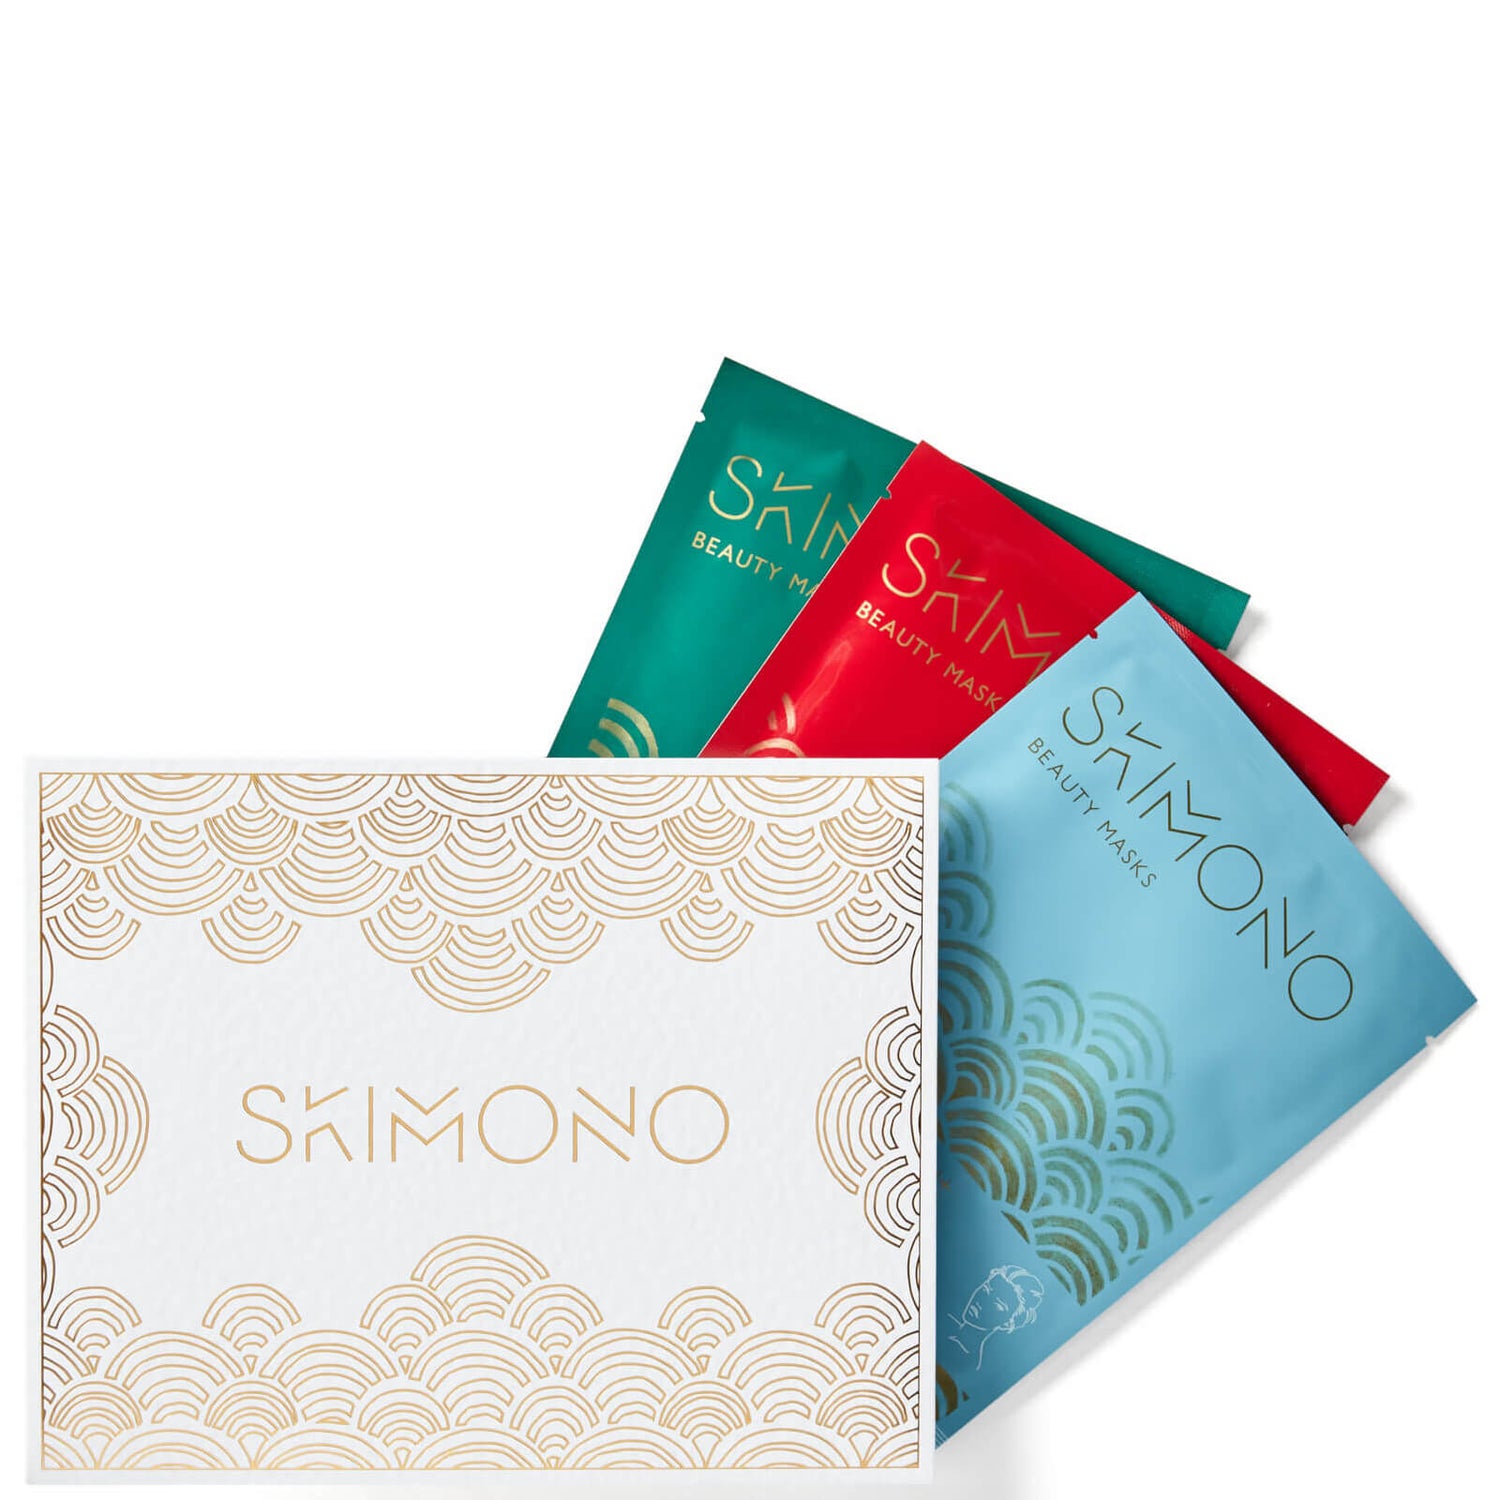 Skimono Indulgence Discovery Pack for Face, Hands and Feet (Worth £35.00)